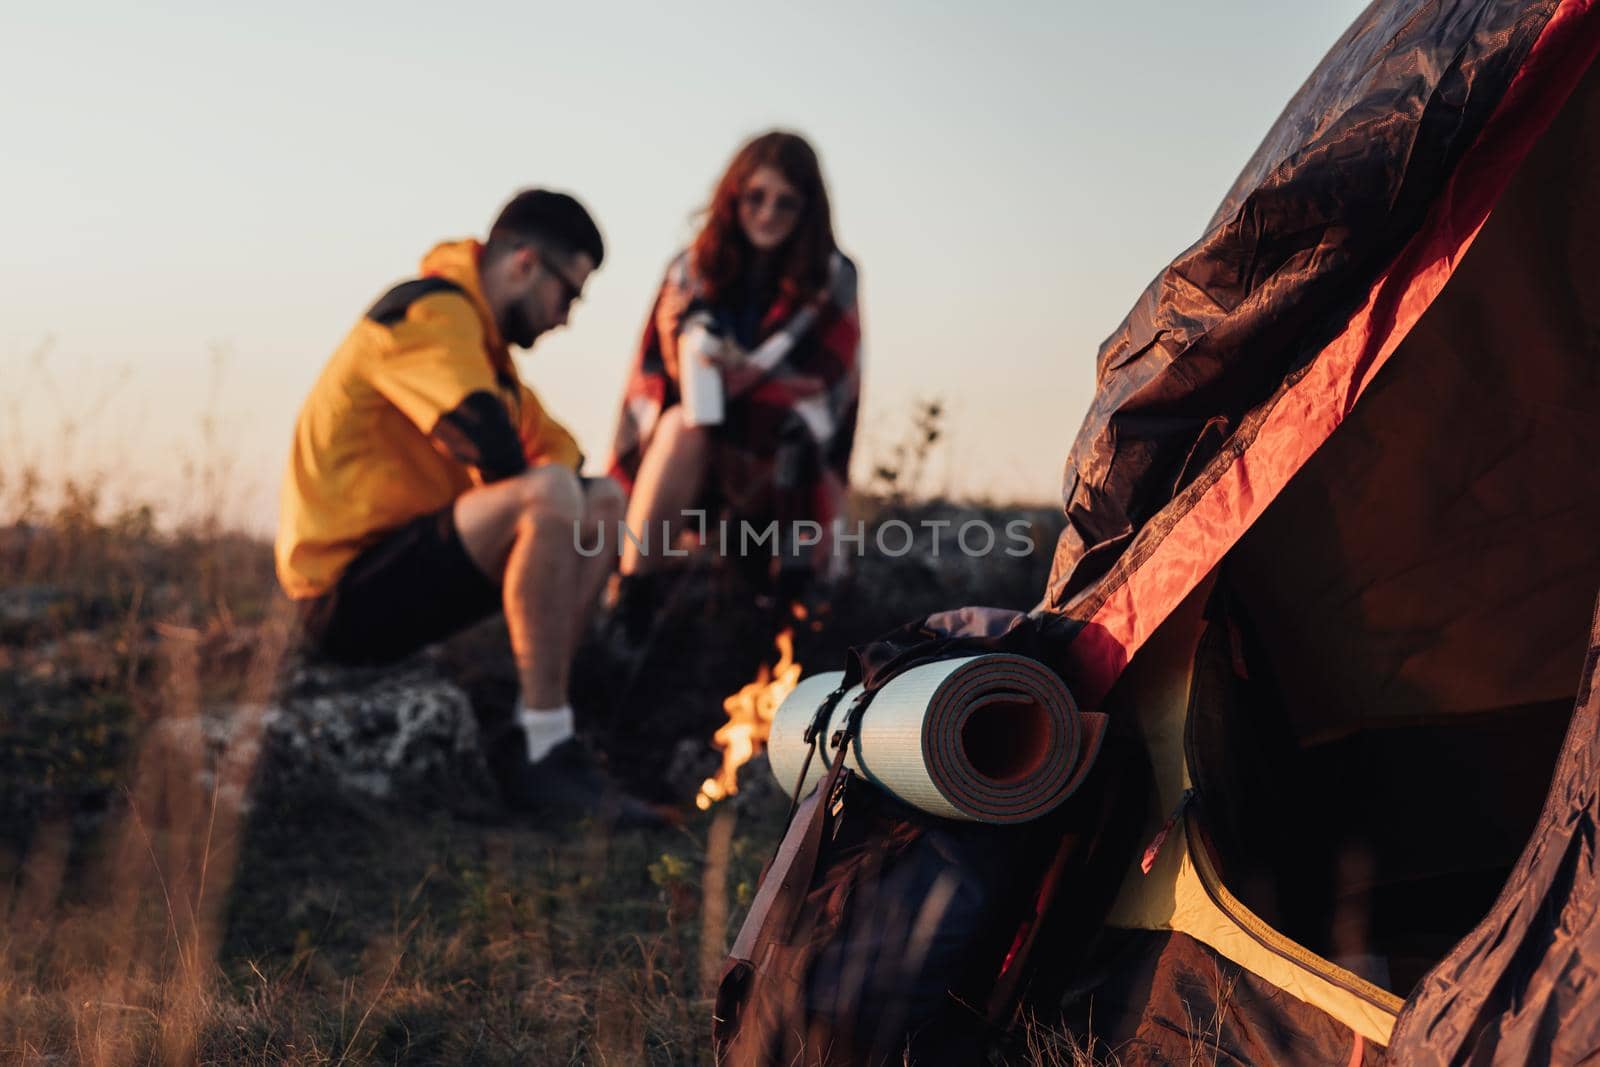 Backpack with Mat and Tent in Focus, on the Background Two Young Travelers Man and Woman Sitting Near the Campfire During Sunset, Travel Concept by Romvy